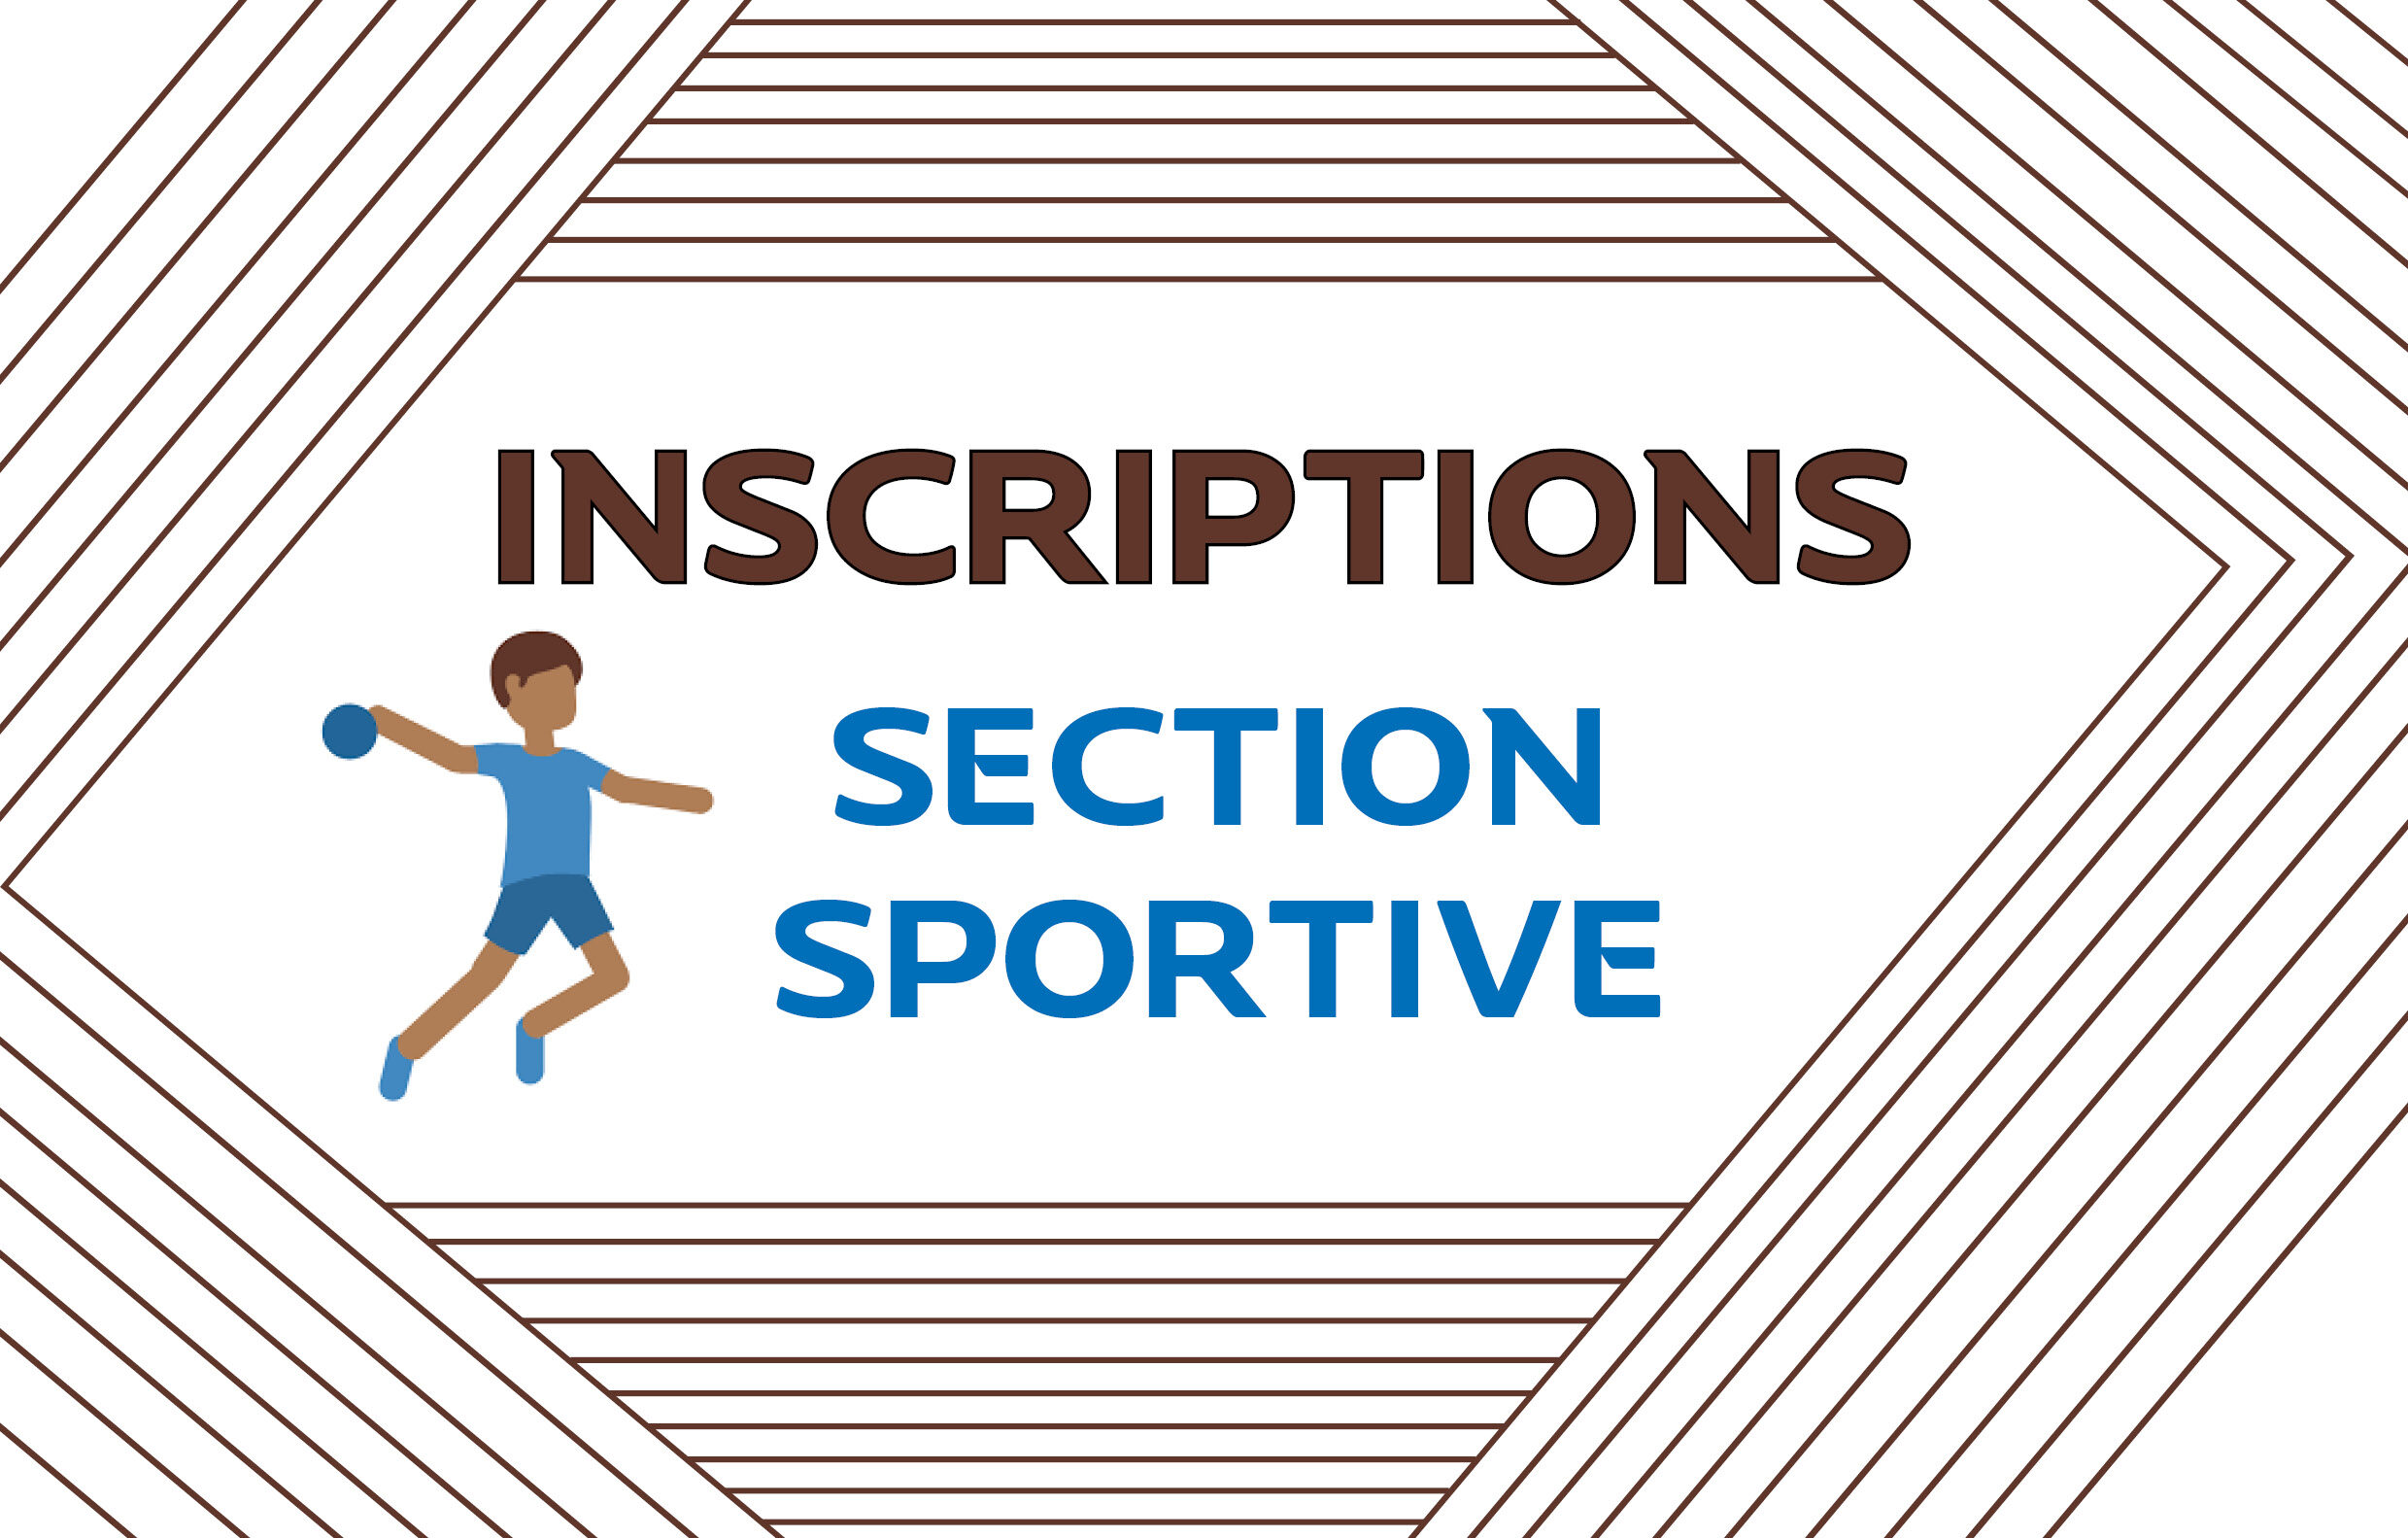 SITE-Section-sportive-1.jpg